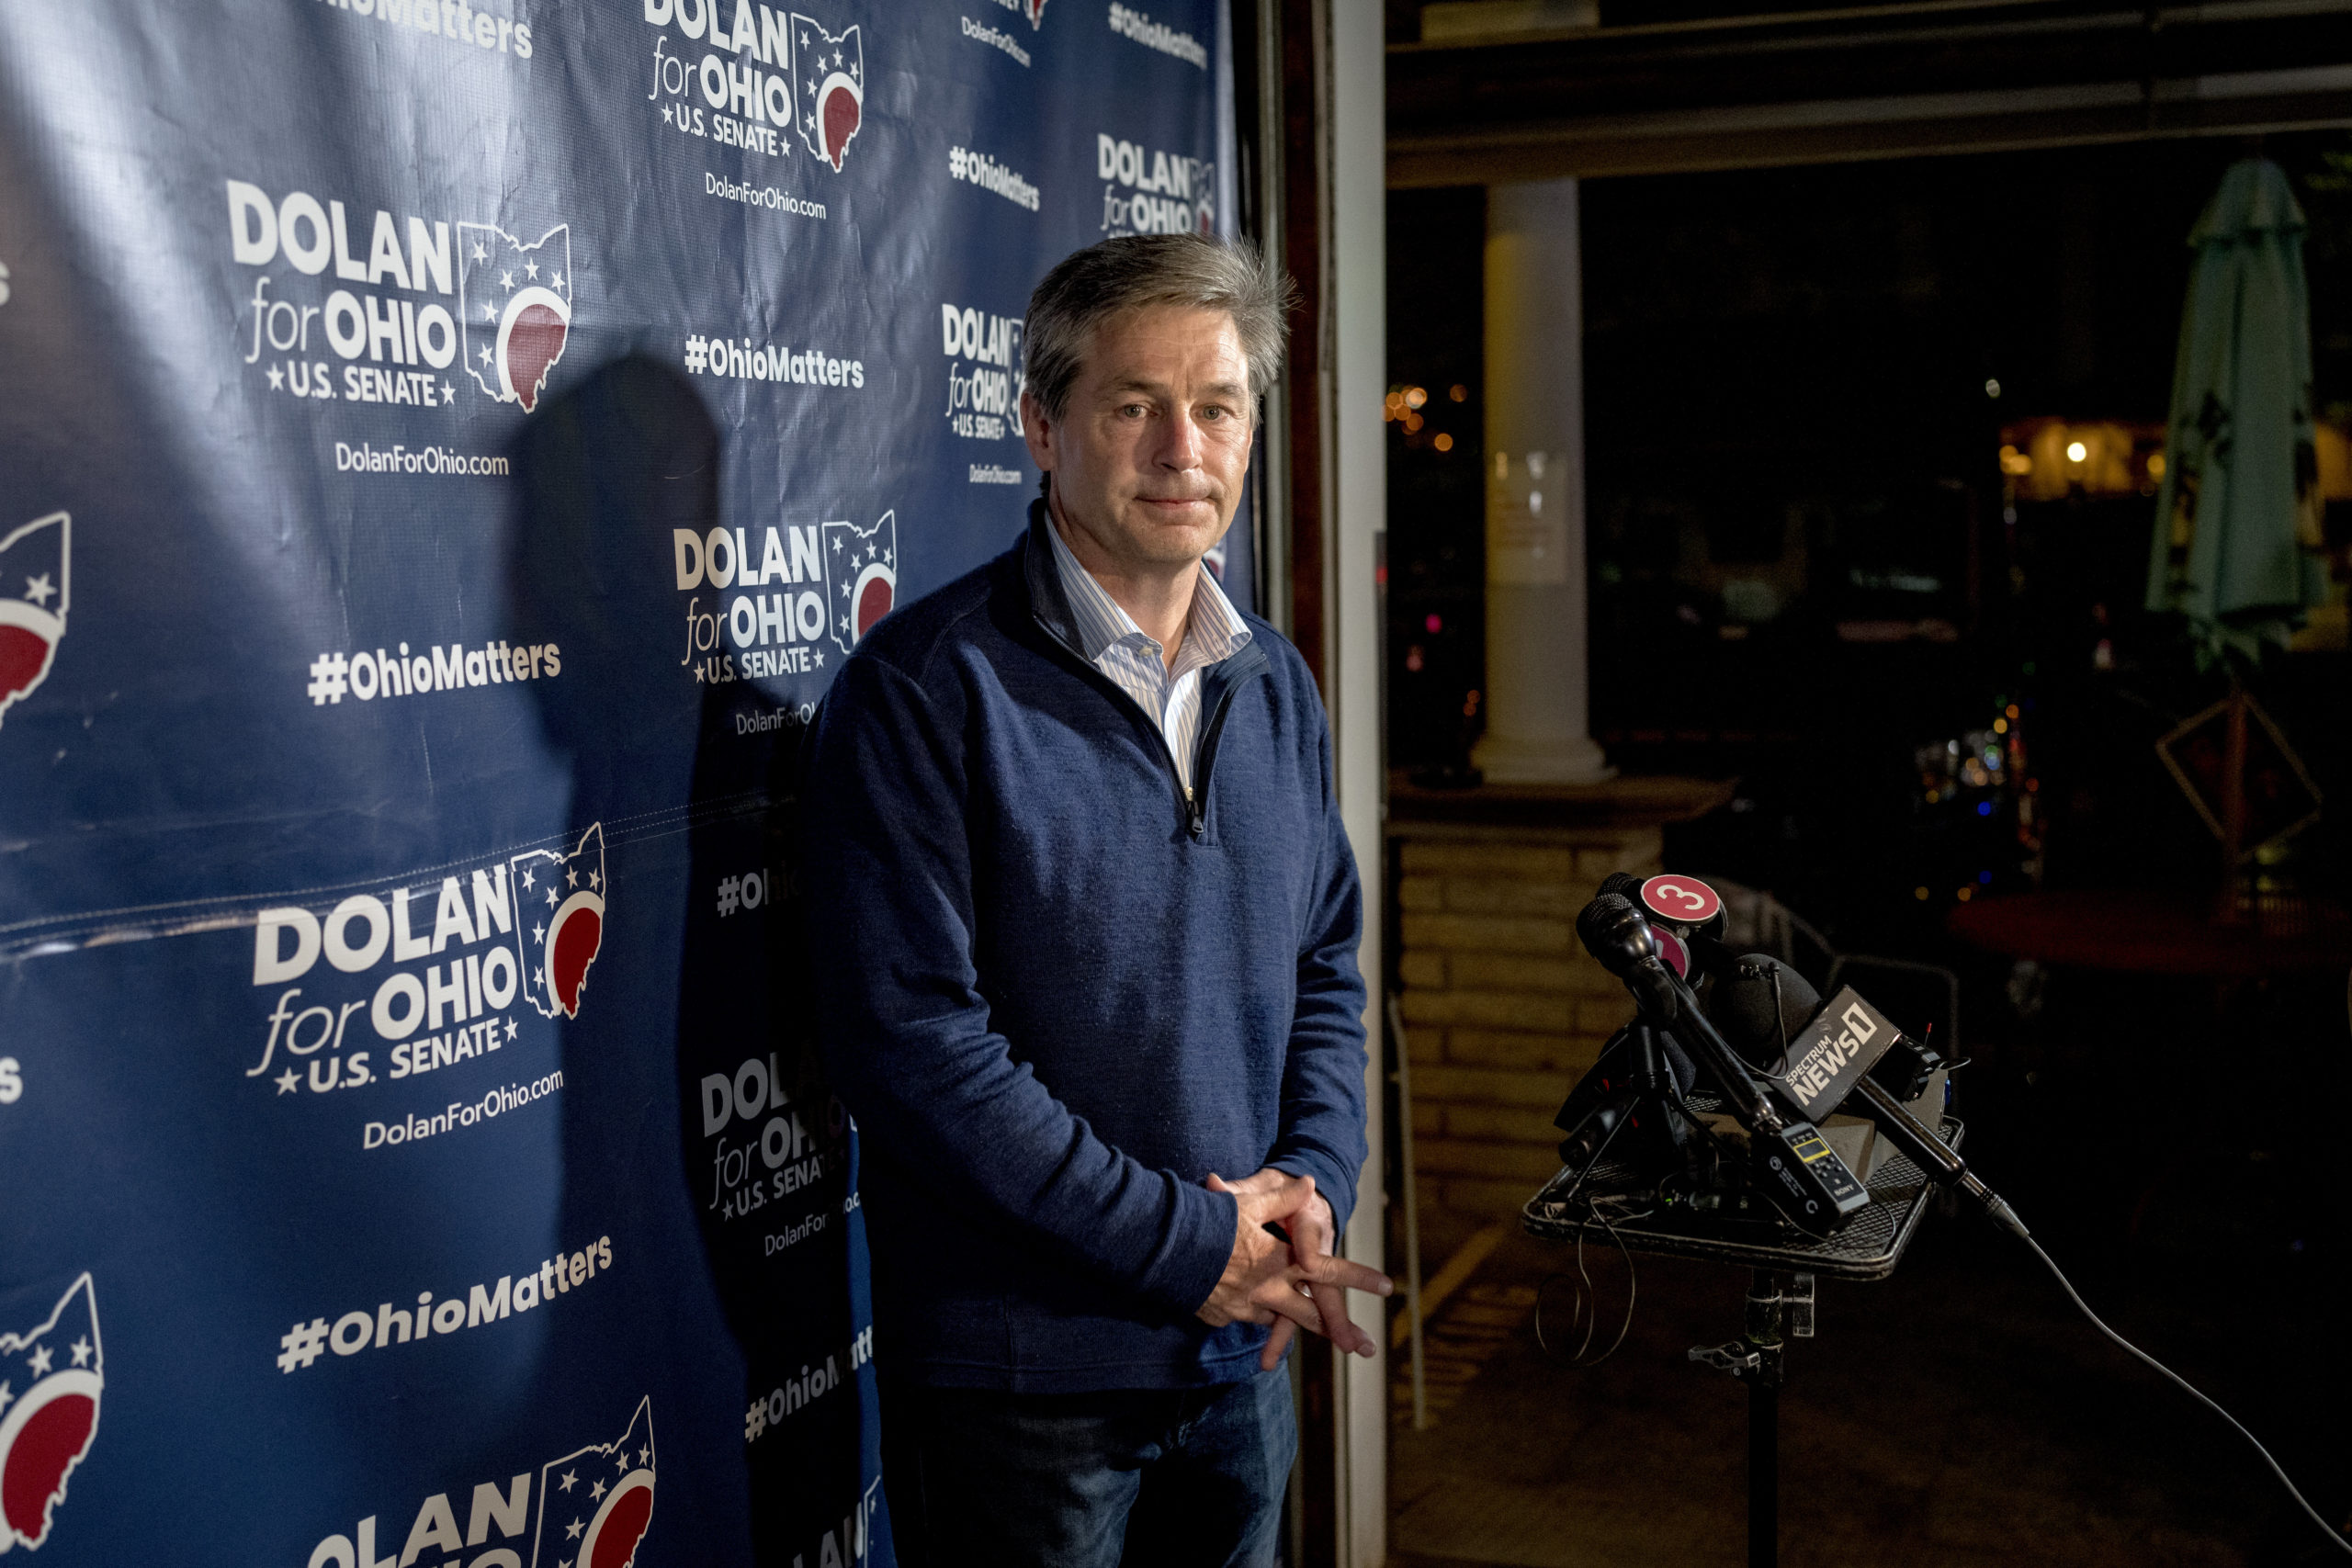 CLEVELAND, OH - MAY 03: Republican U.S. Senate candidate Matt Dolan addresses the media after his loss to J.D. Vance during an election night watch party at the Tavern of Independence on May 3, 2022 in Independence, Ohio. Vance, who was endorsed by former President Donald Trump, narrowly won over former state Treasurer Josh Mandel, according to published reports. (Photo by Nic Antaya/Getty Images)